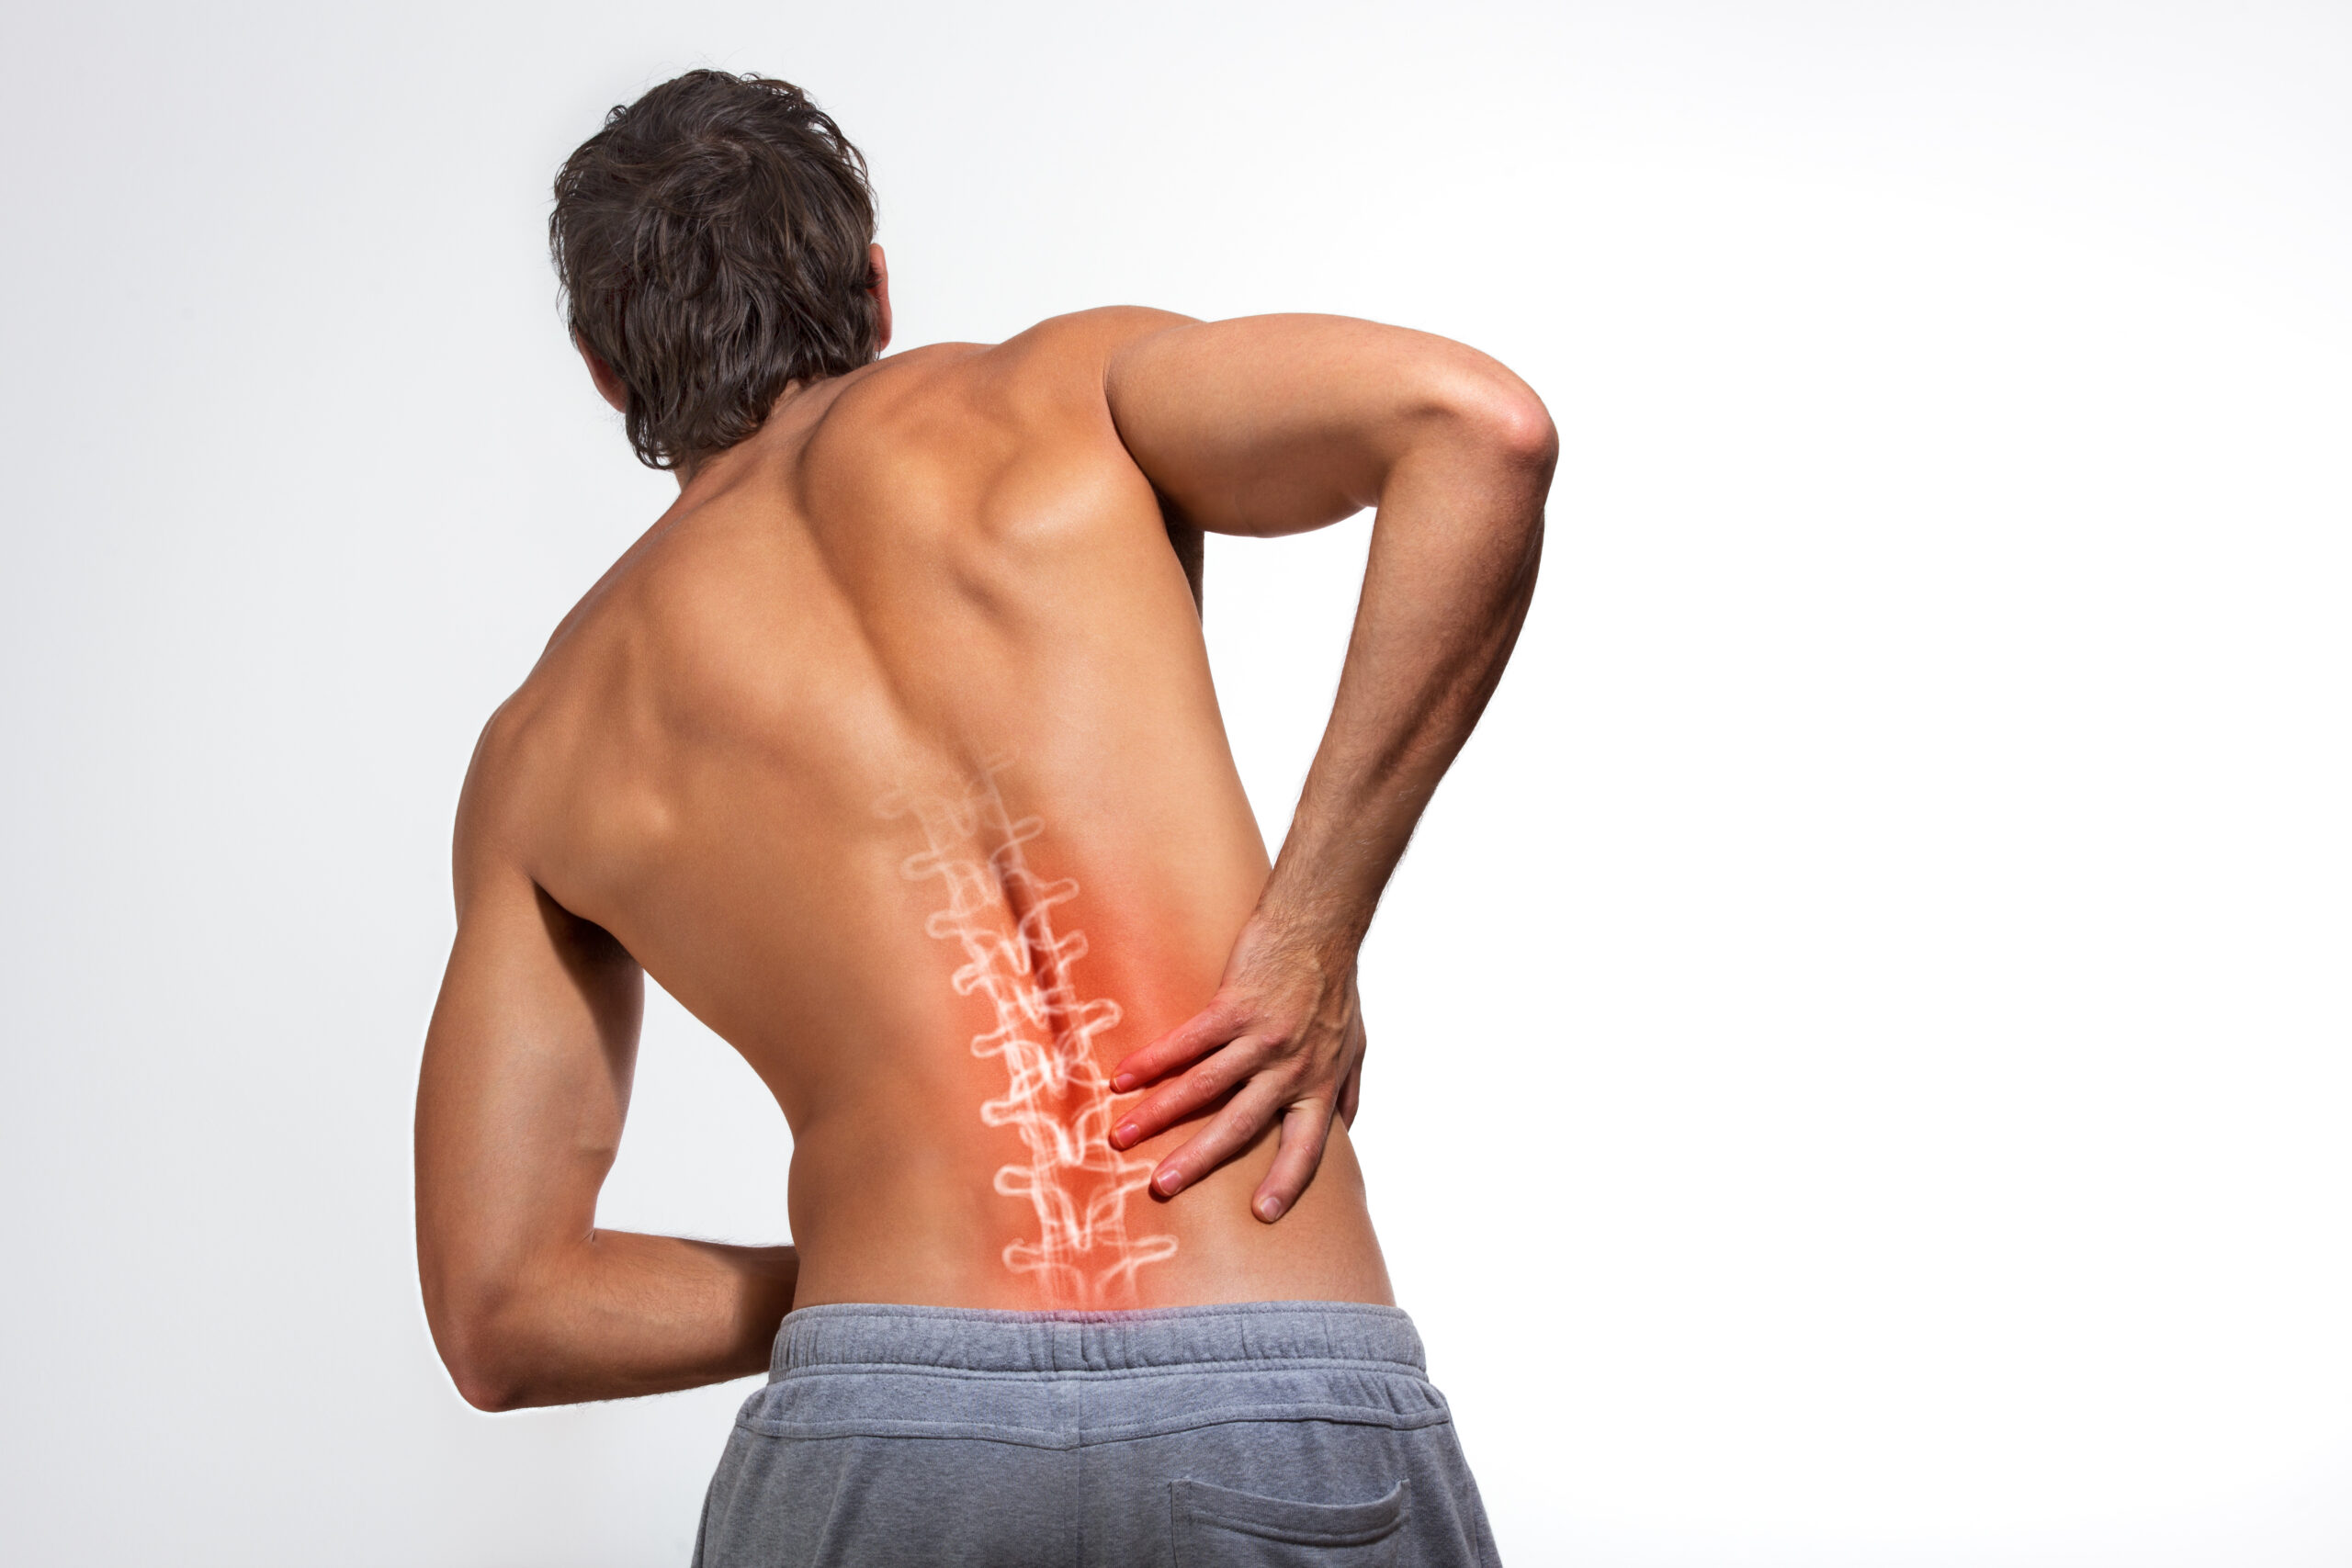 Human spine illustration,backache, man holding his hand in the back pain area